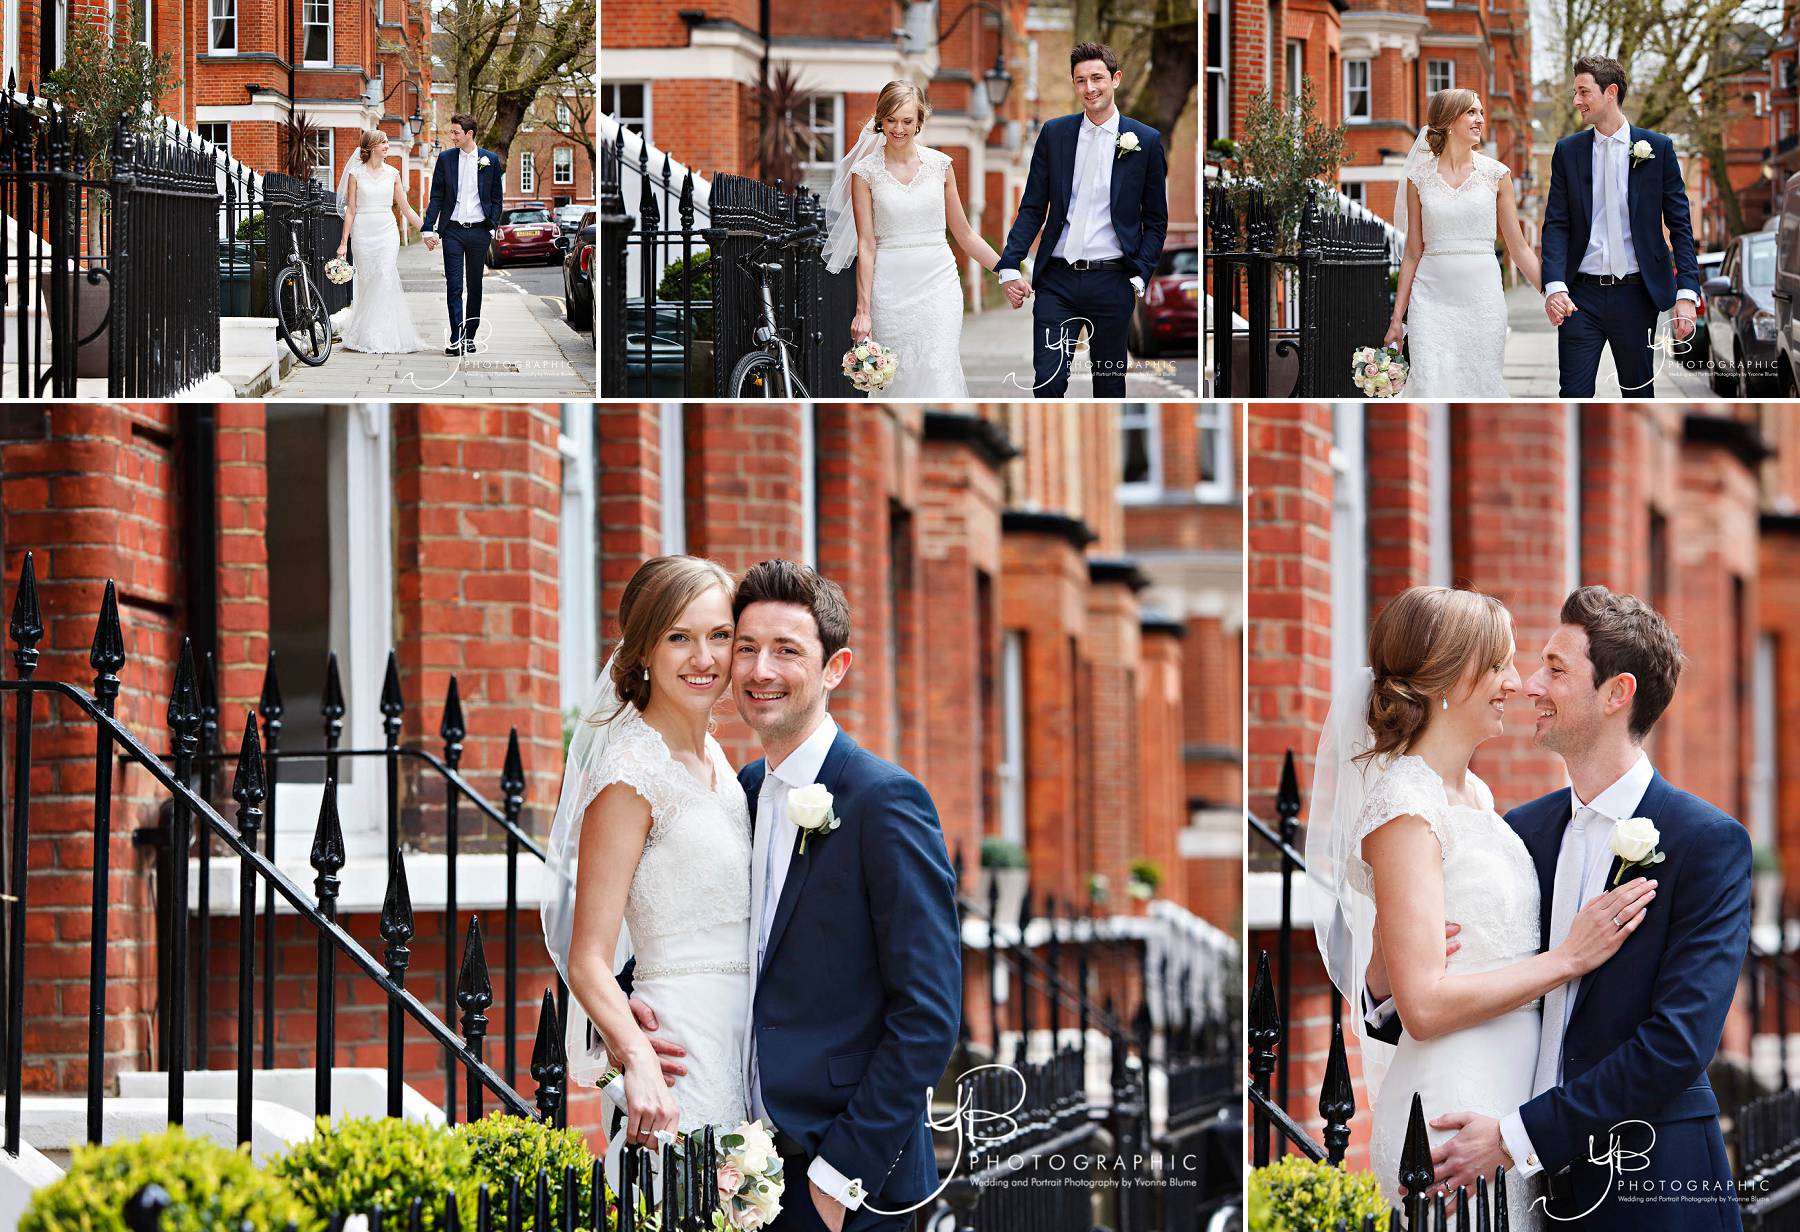 Chelsea Spring Wedding Portraits by YBPHOTOGRAPHIC